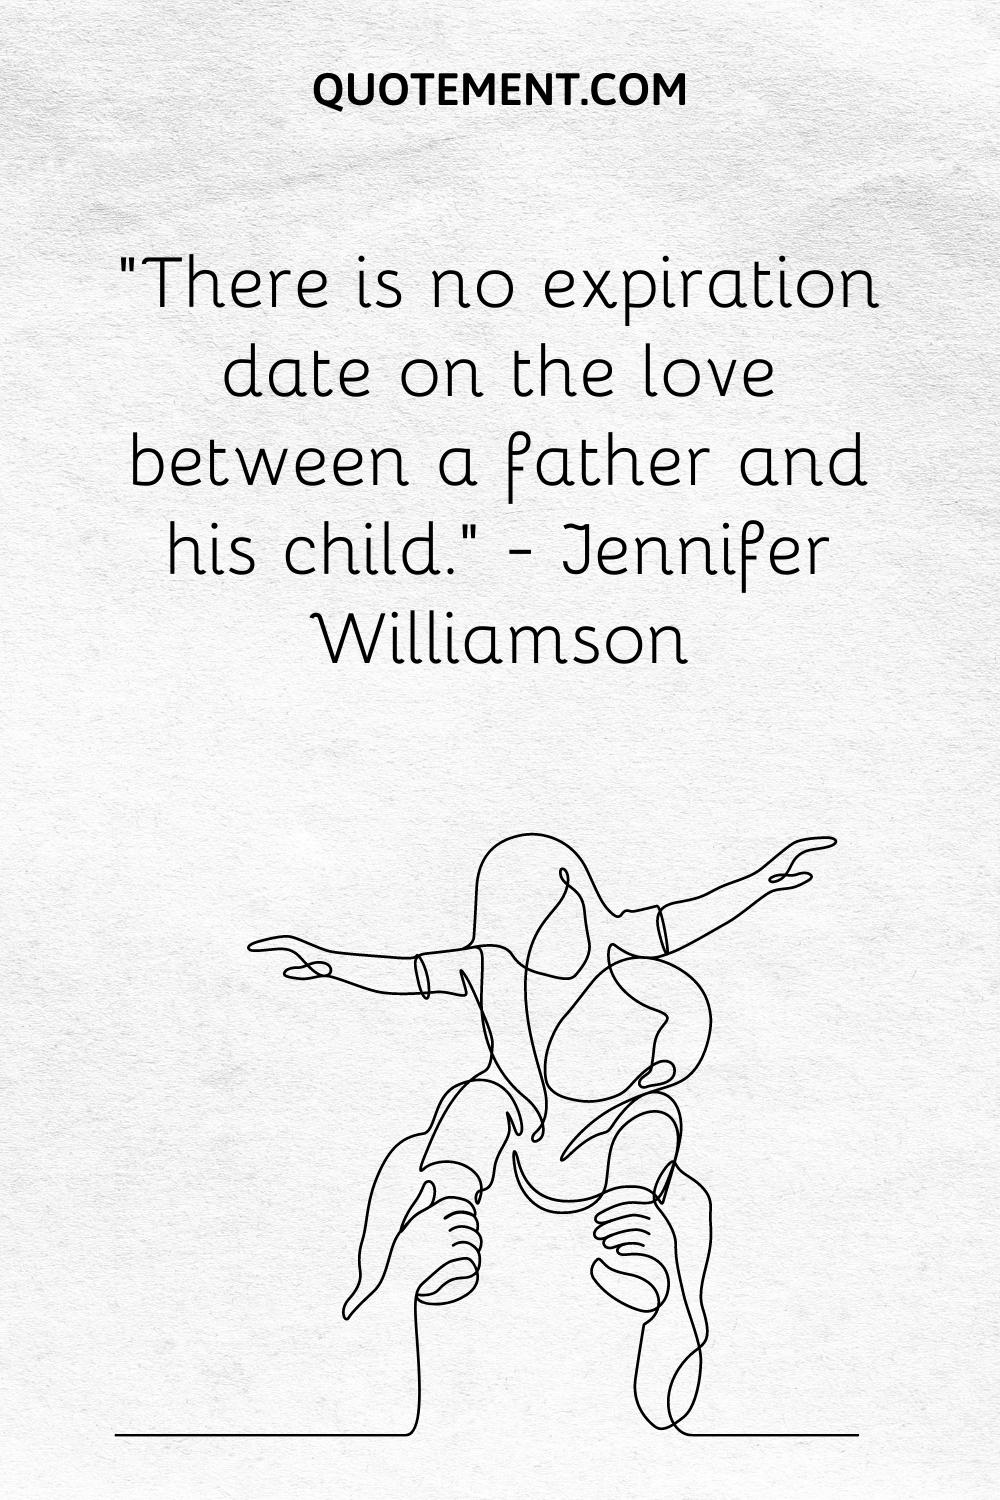 “There is no expiration date on the love between a father and his child.” — Jennifer Williamson